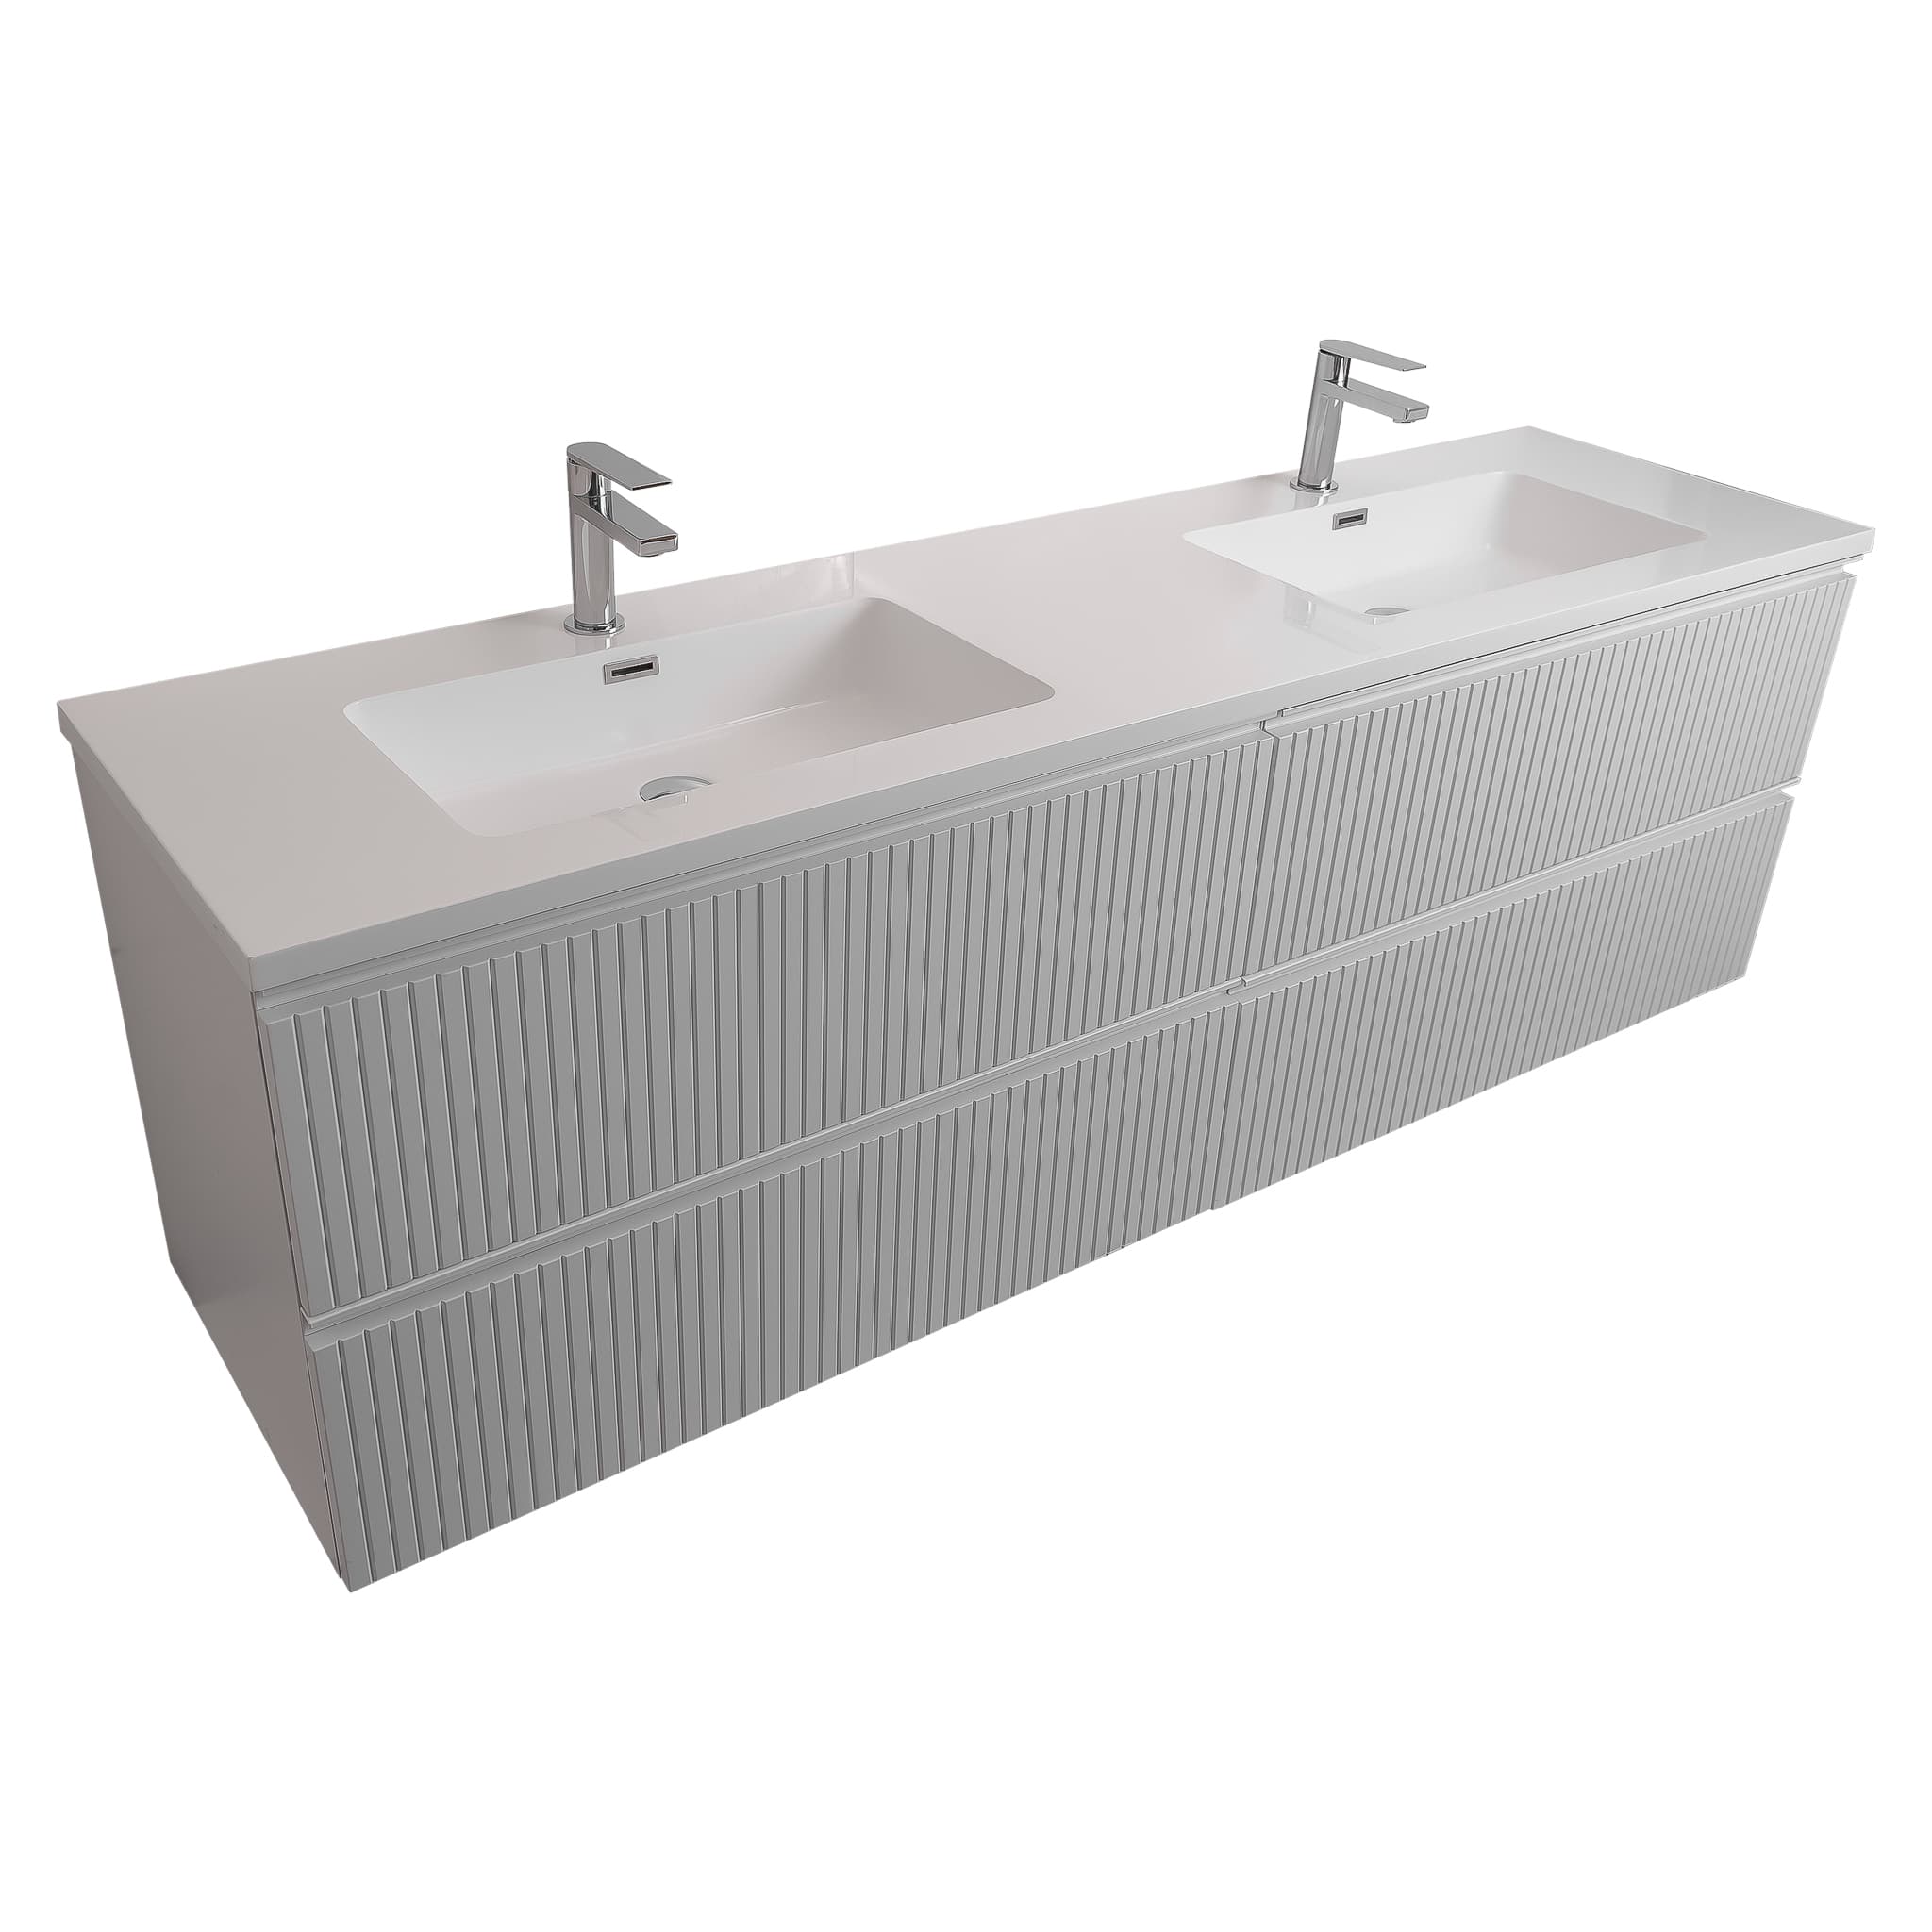 Ares 63 Matte White Cabinet, Square Cultured Marble Double Sink, Wall Mounted Modern Vanity Set